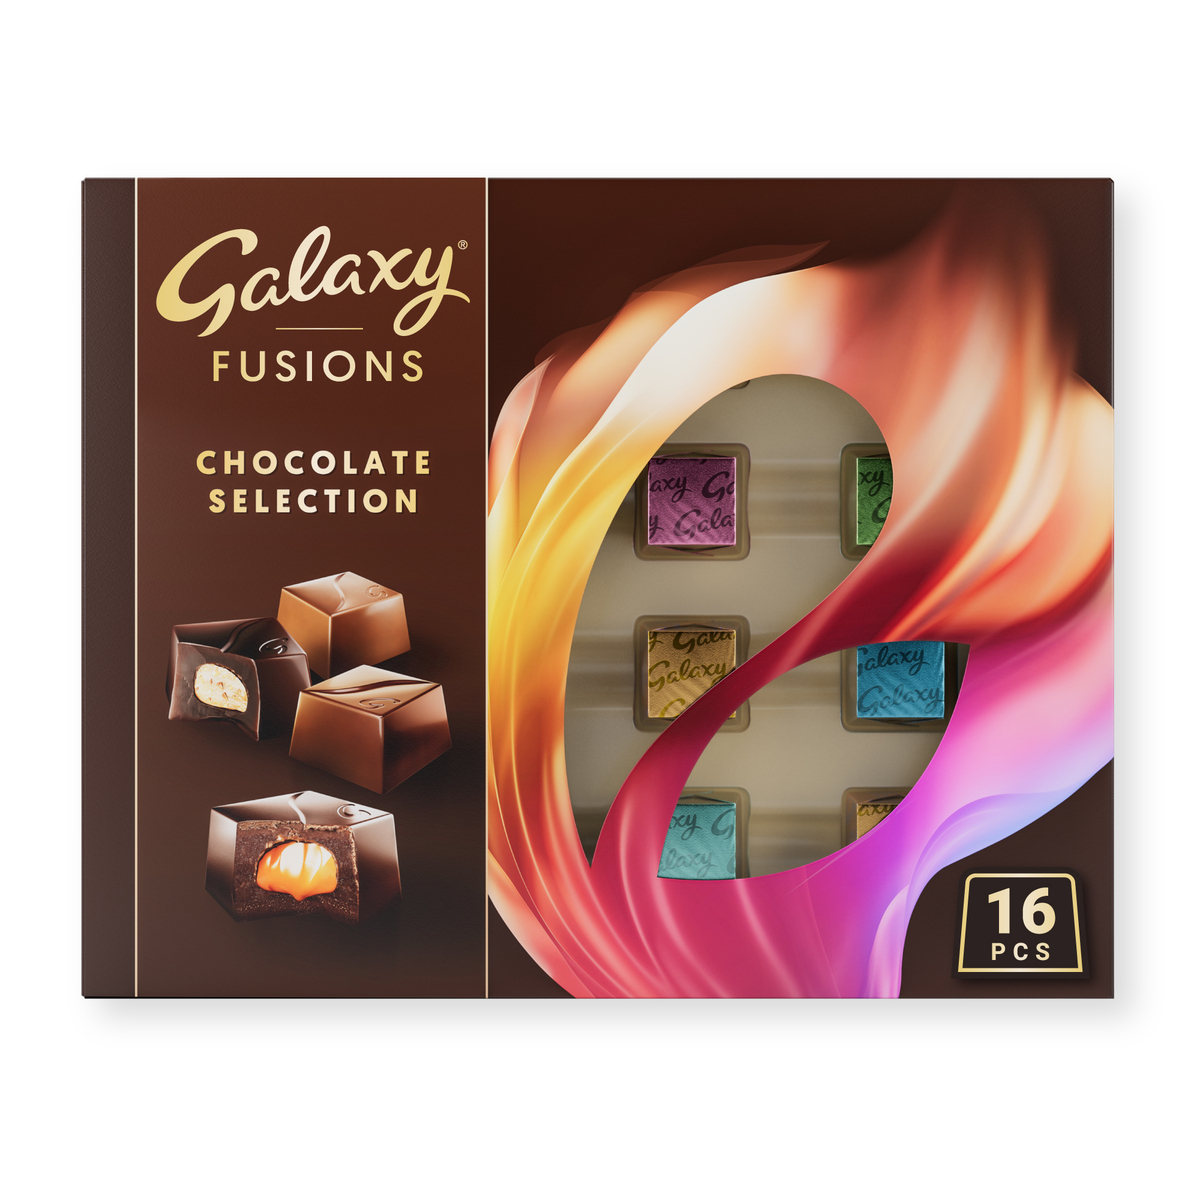 Buy Galaxy Fusions Chocolate Selection 16 pcs 180.8 g Online at Best Price | Food Fest Grocery | Lulu Kuwait in UAE